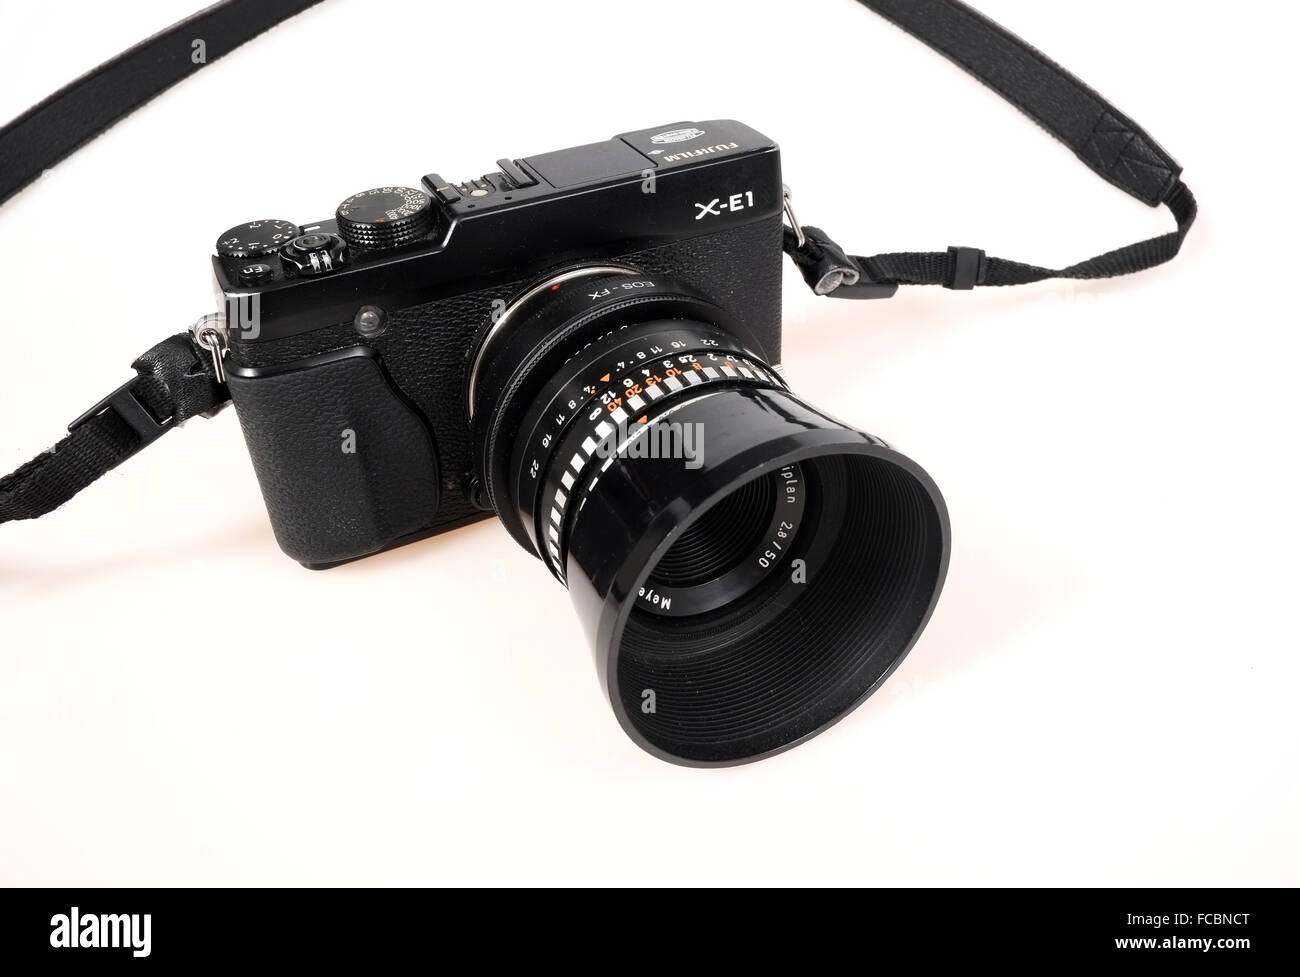 Well used Fuji X-E1 compact system camera fitted with an old East German lens with two adapters to allow it to fit. January 2016 Stock Photo